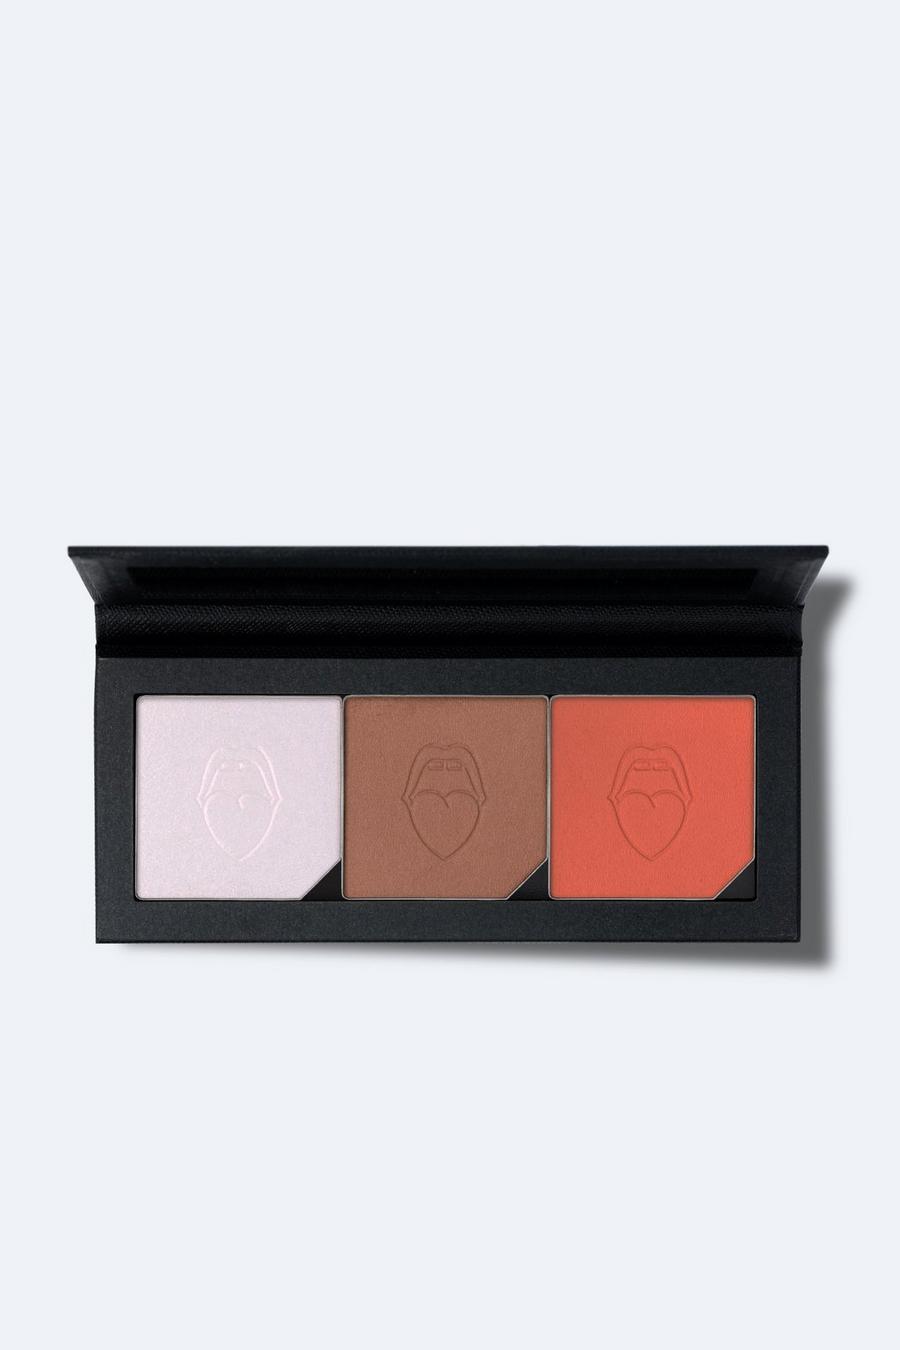 Nasty Gal Beauty Face Palette Trio